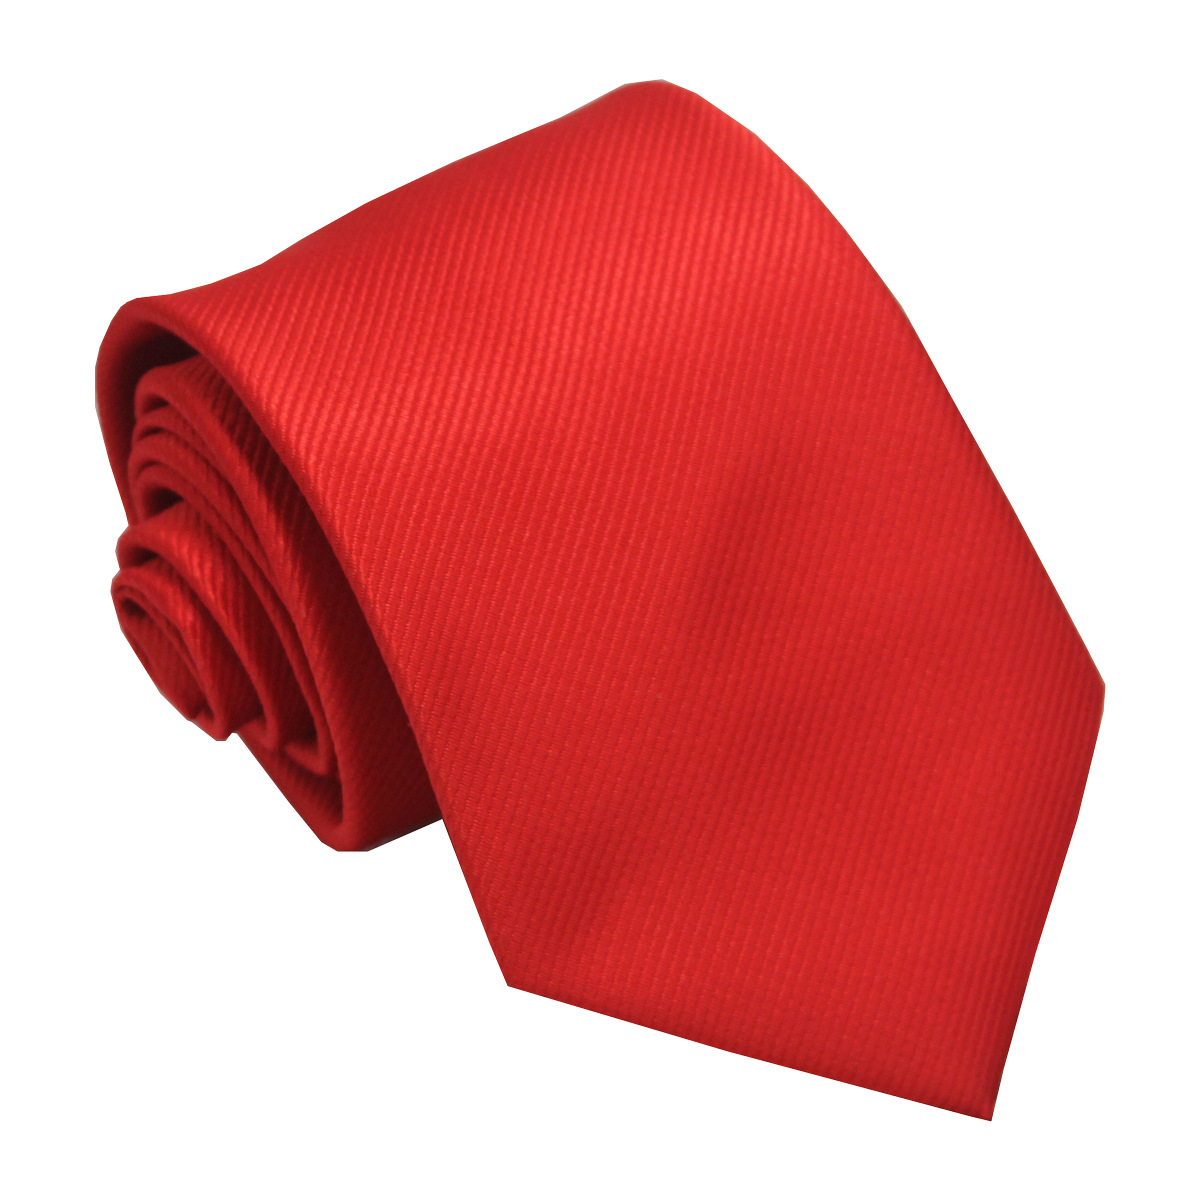 Business Casual Men's Tie Polyester Silk Twill Black Red Suit Accessories 8cm Hand Tie Solid Color Tie